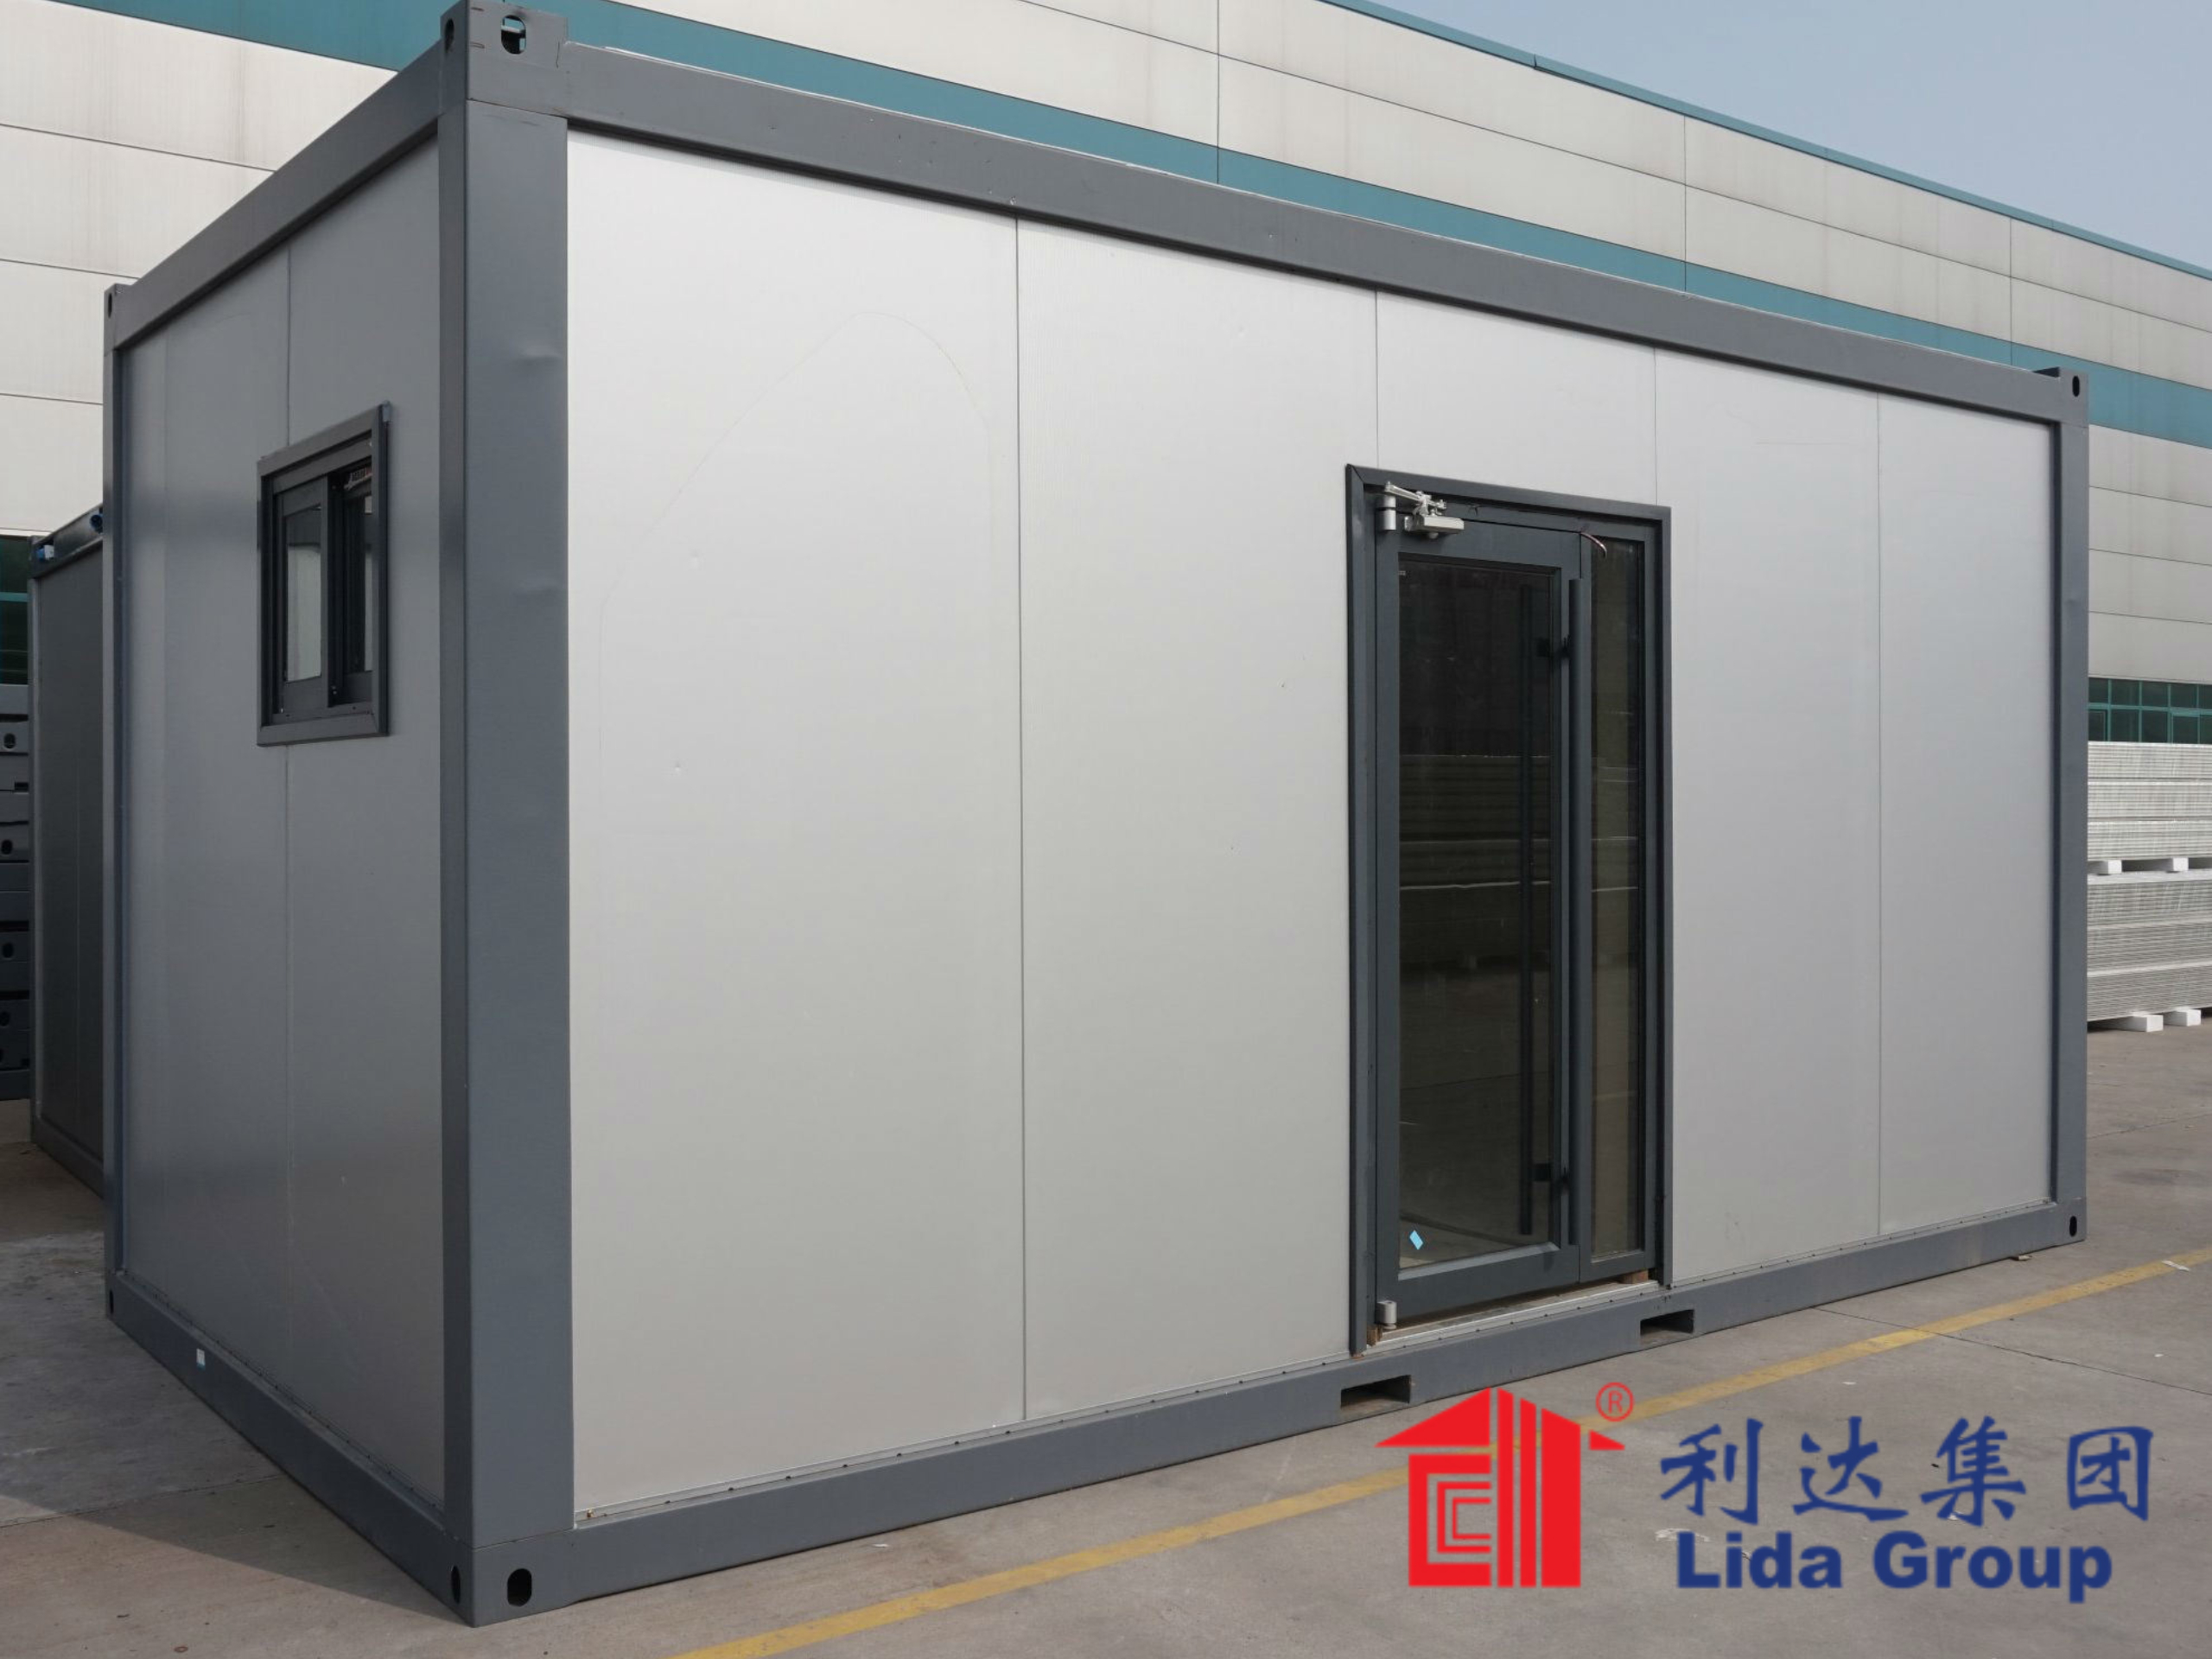 Off-grid steel container homes manufactured and delivered within weeks by Lida Group provide affordable housing alternative for construction workers building remote infrastructure projects.